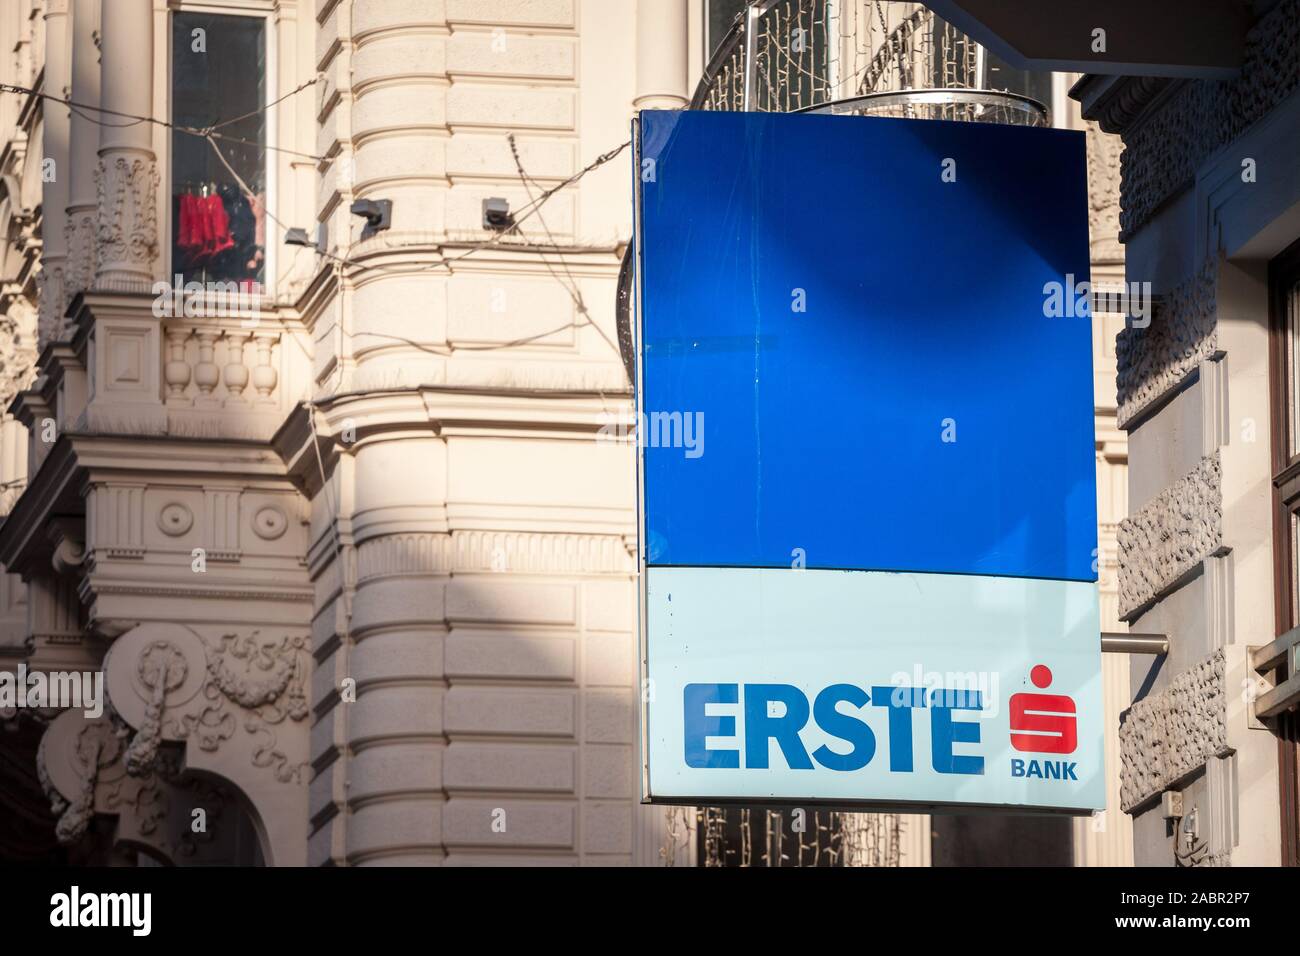 VIENNA, AUSTRIA - NOVEMBER 6, 2019: Erste Bank logo on their main office for downtown Vienna. Erste Bank is an Austrian retail and corporate bank, one Stock Photo